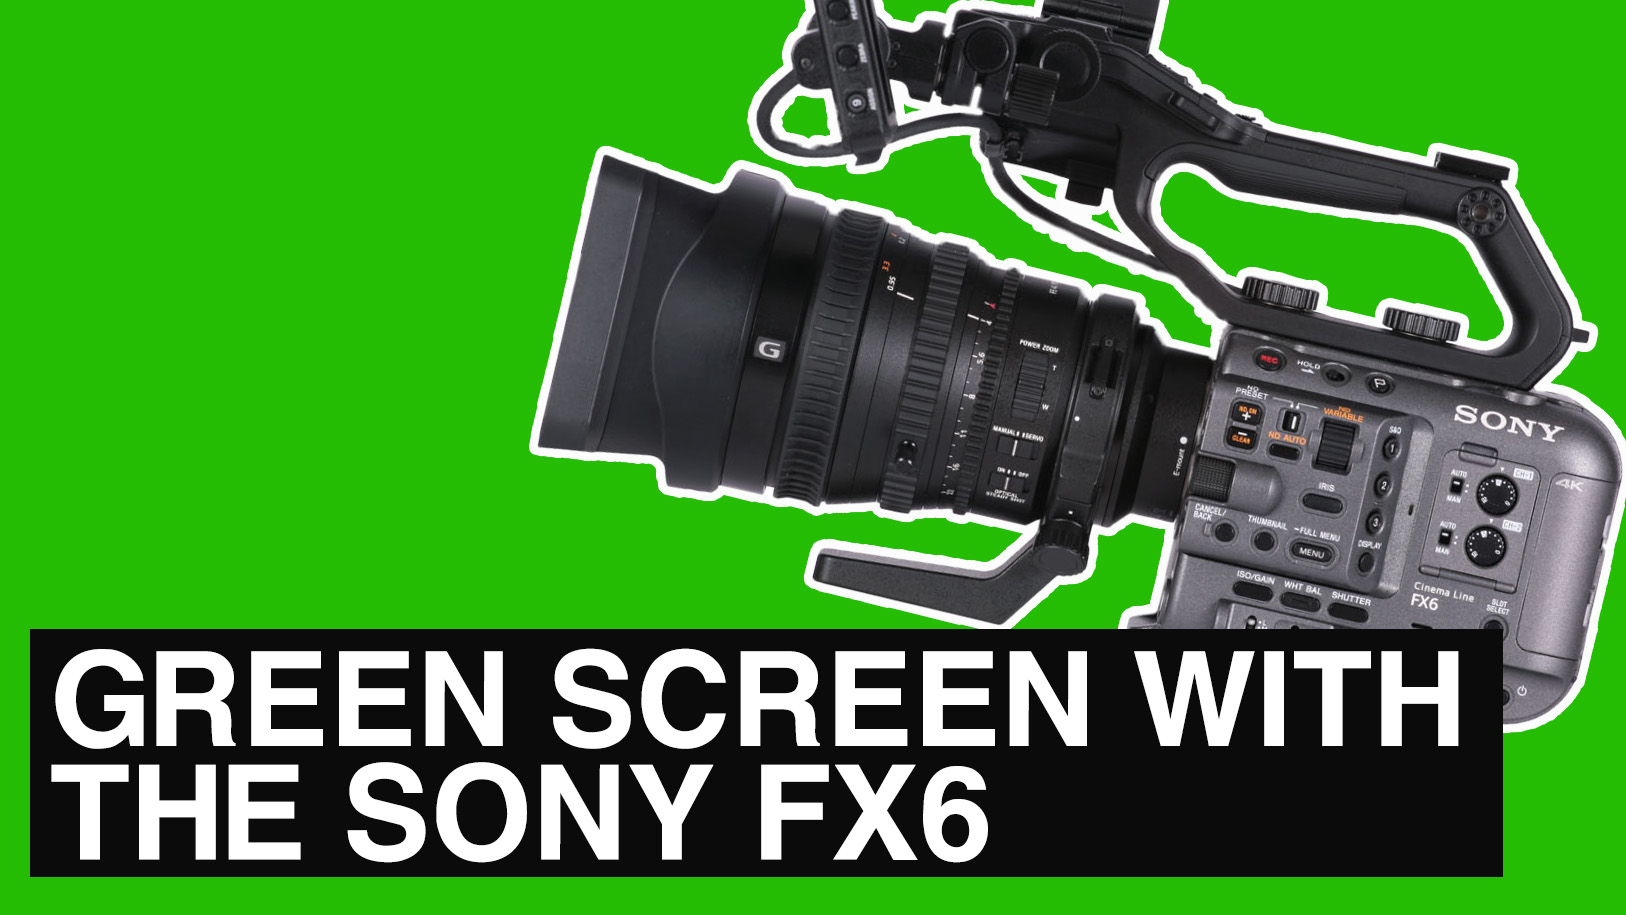 Shooting Green Screen with the Sony FX6 Camera